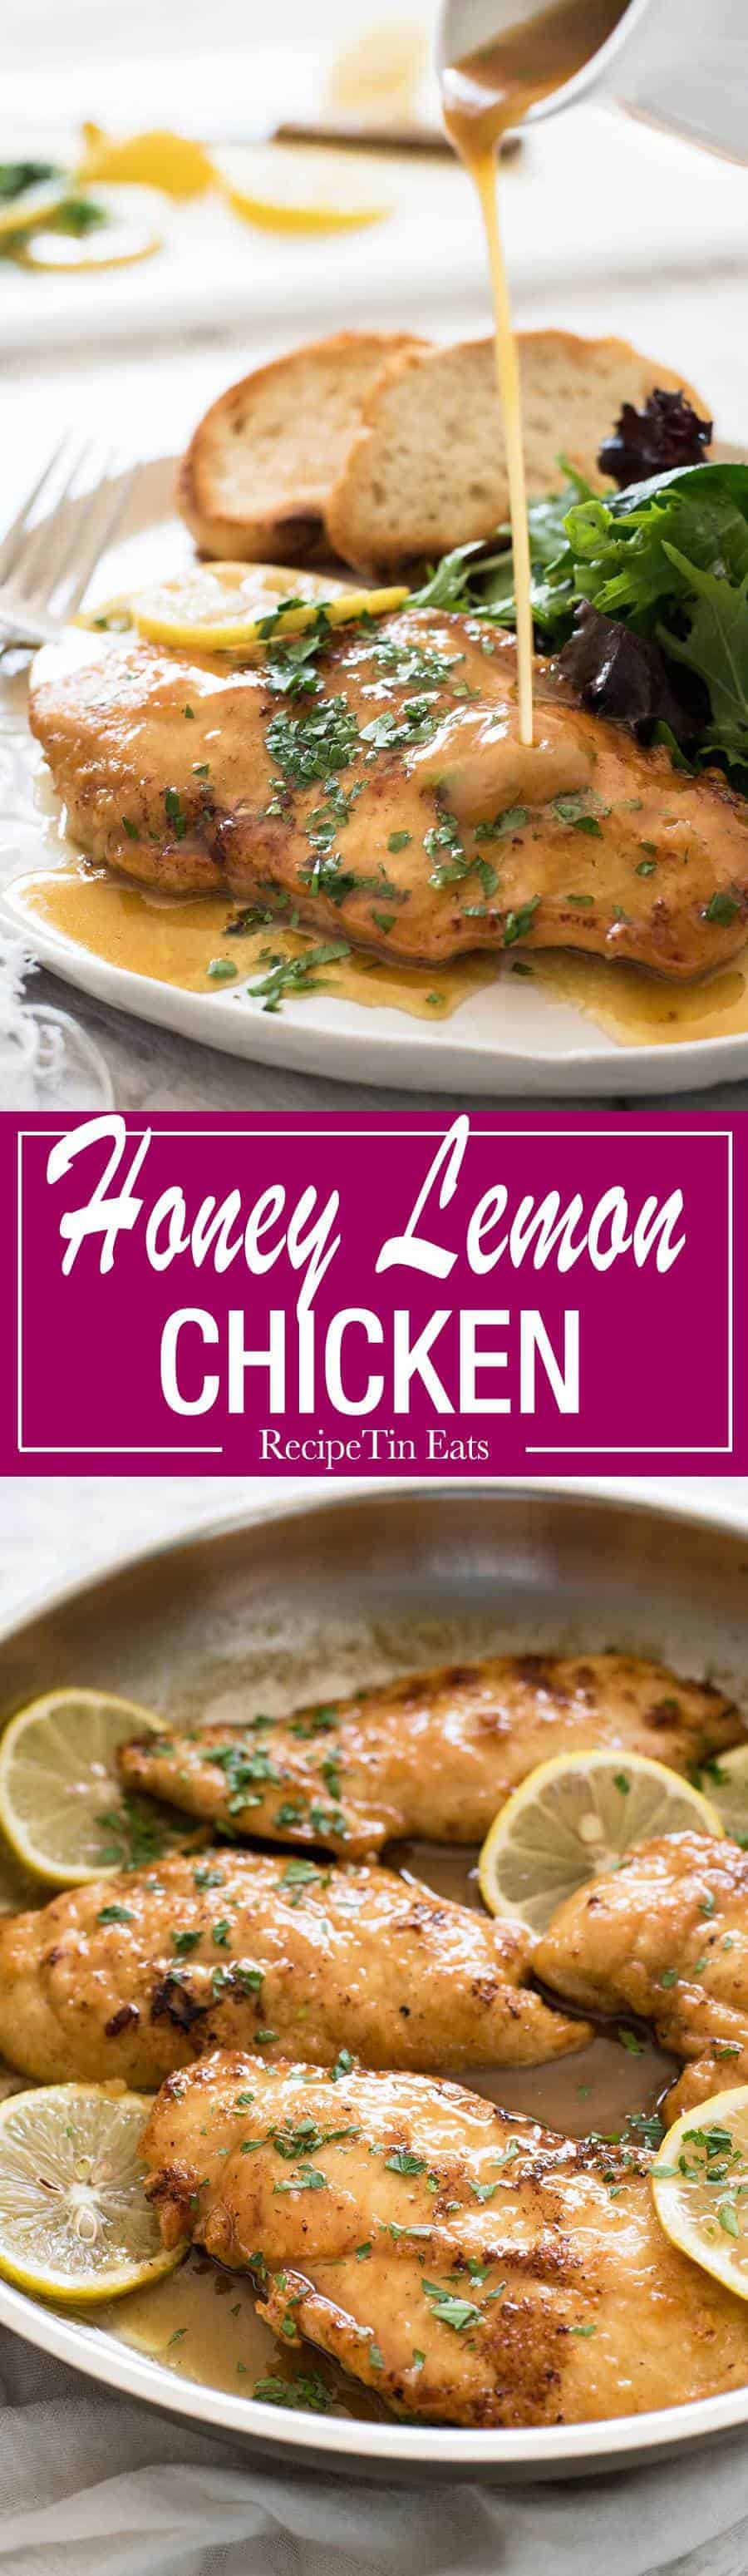 The honey lemon sauce is divine!!! This chicken is part of my regular rotation!